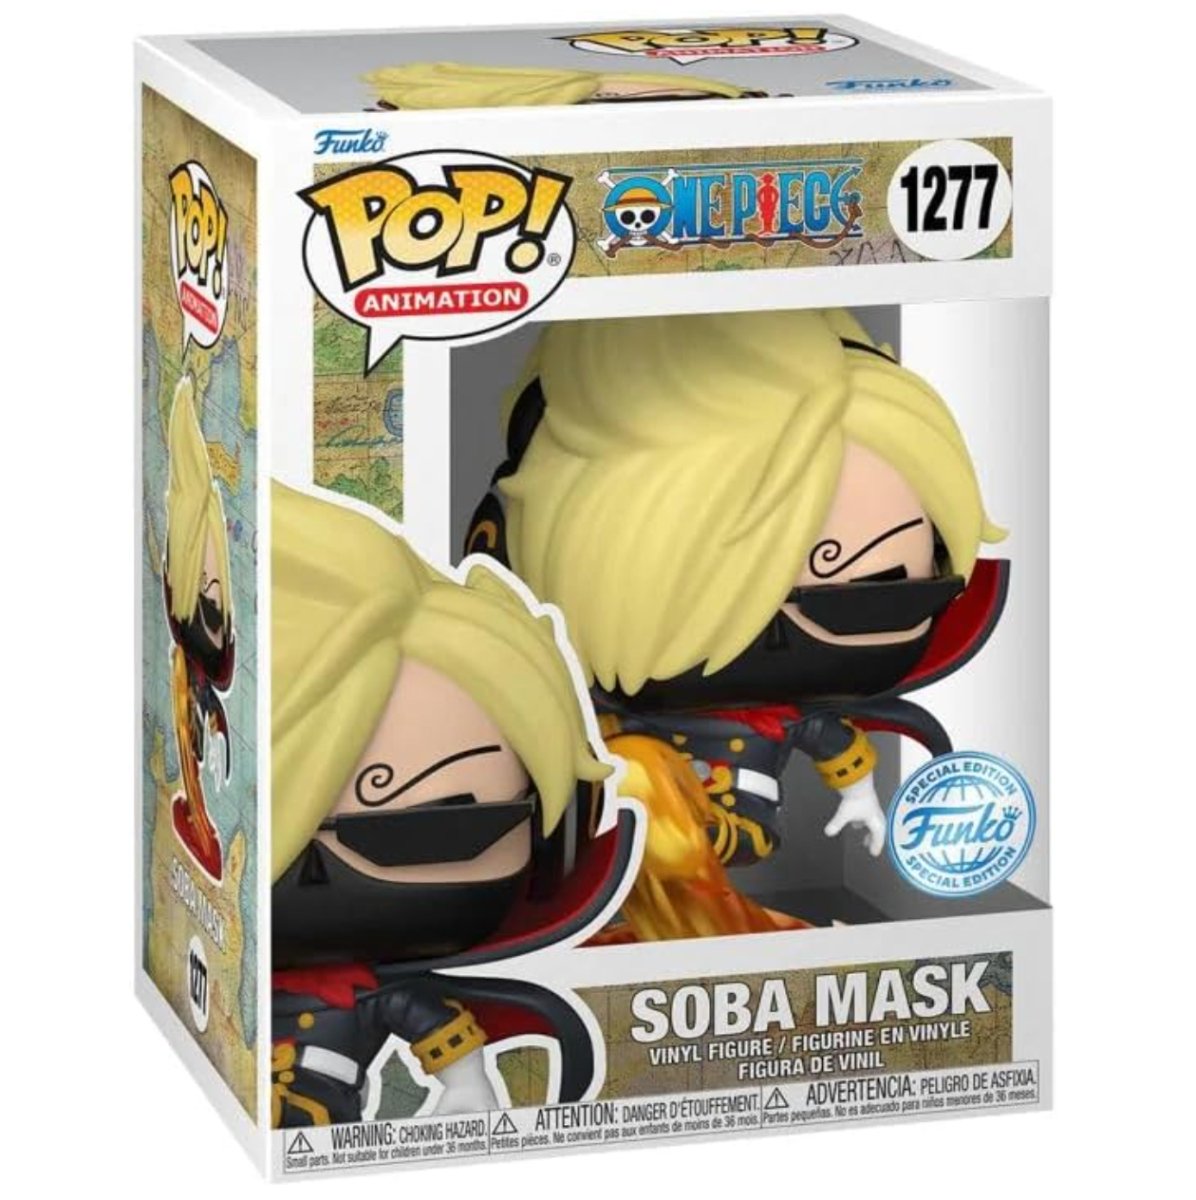 One Piece - Soba Mask (Special Edition) #1277 - Funko Pop! Vinyl Anime - Persona Toys